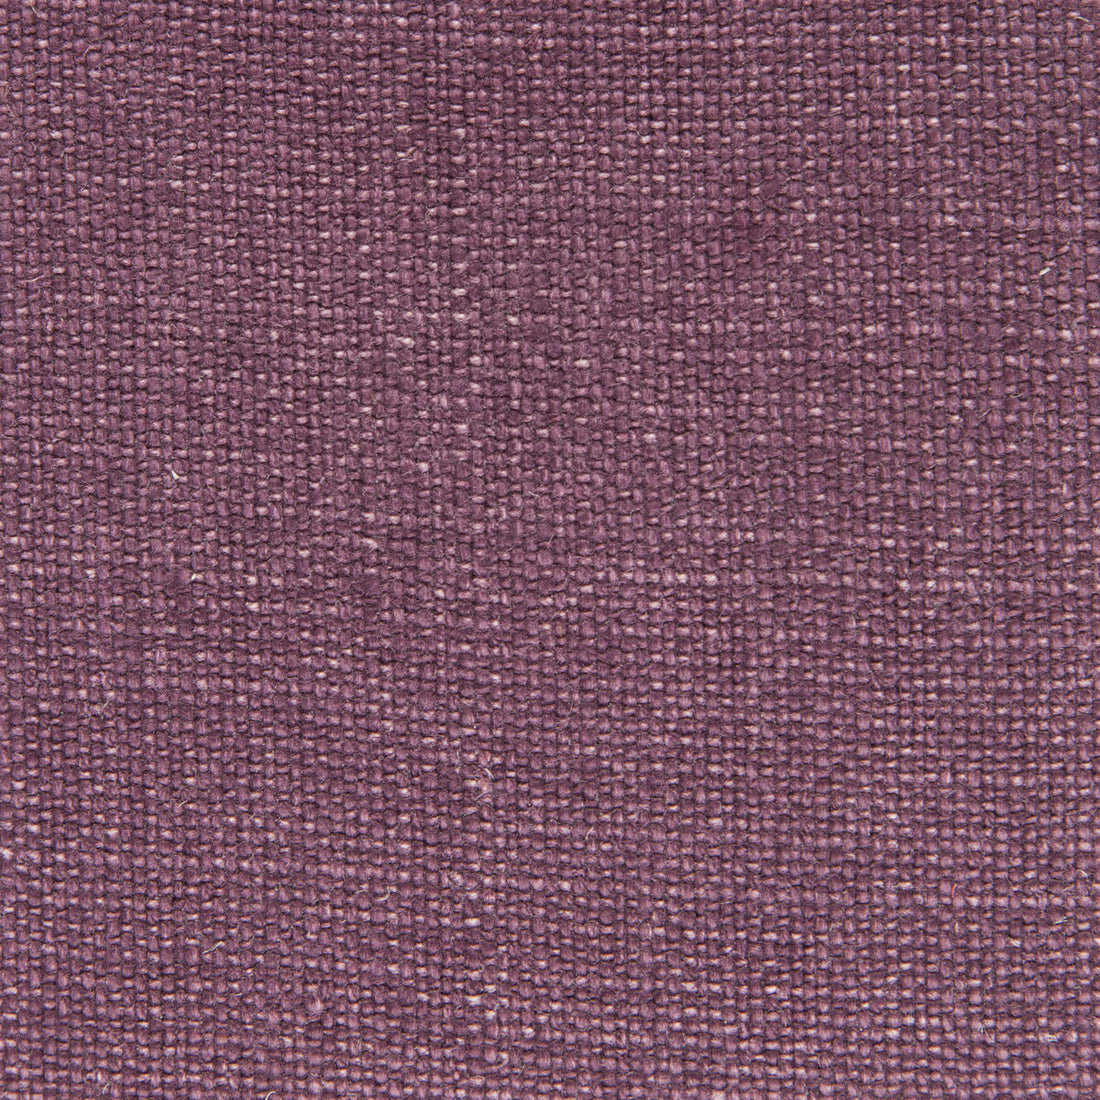 Nicaragua fabric in granate color - pattern GDT5239.003.0 - by Gaston y Daniela in the Basics collection